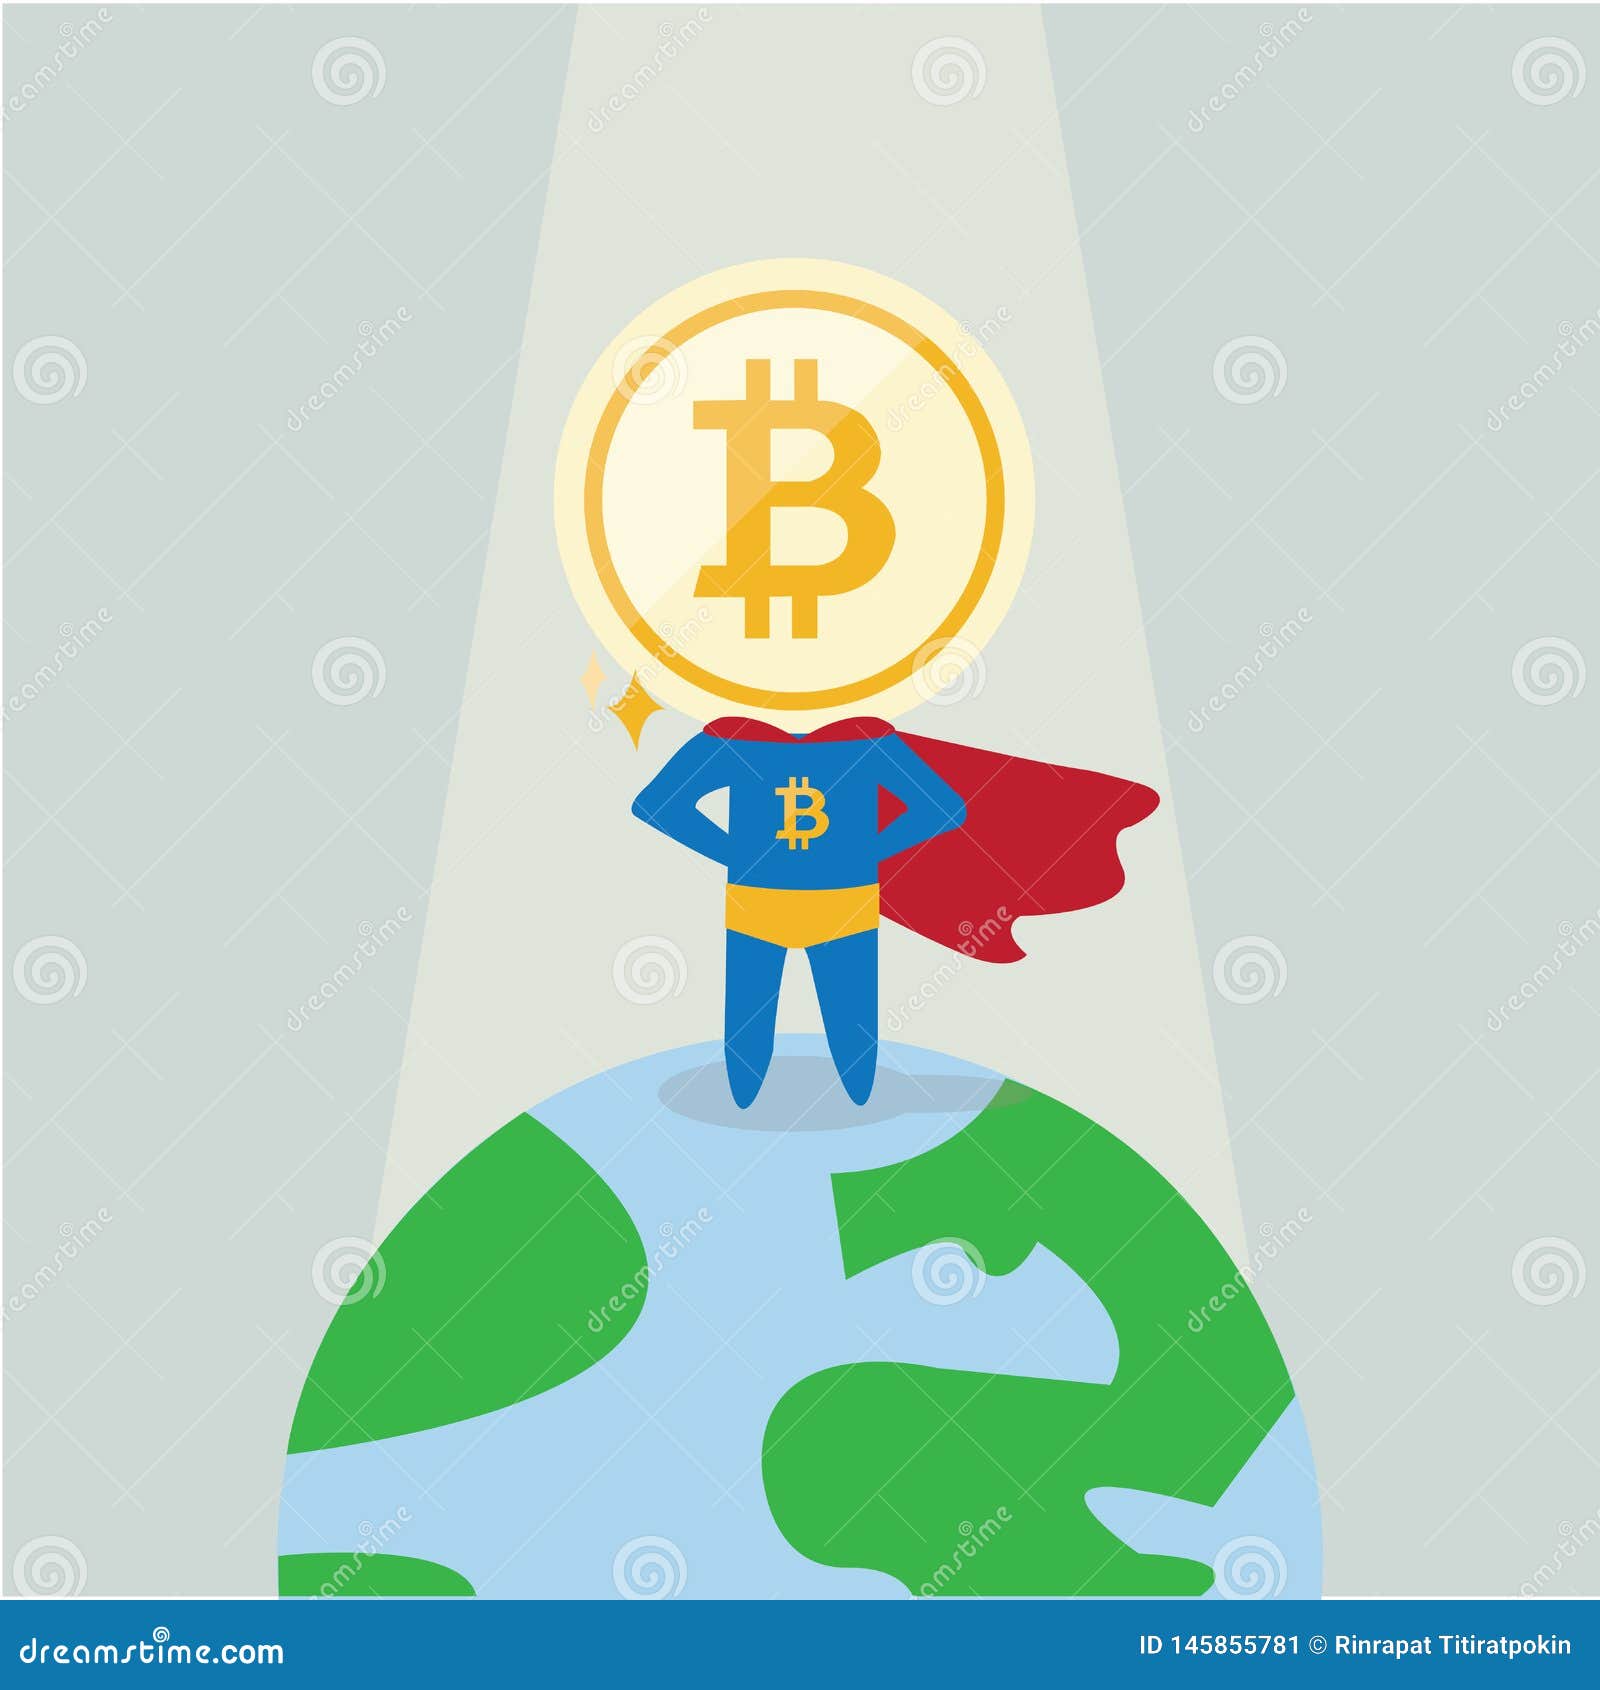 superman cryptocurrency